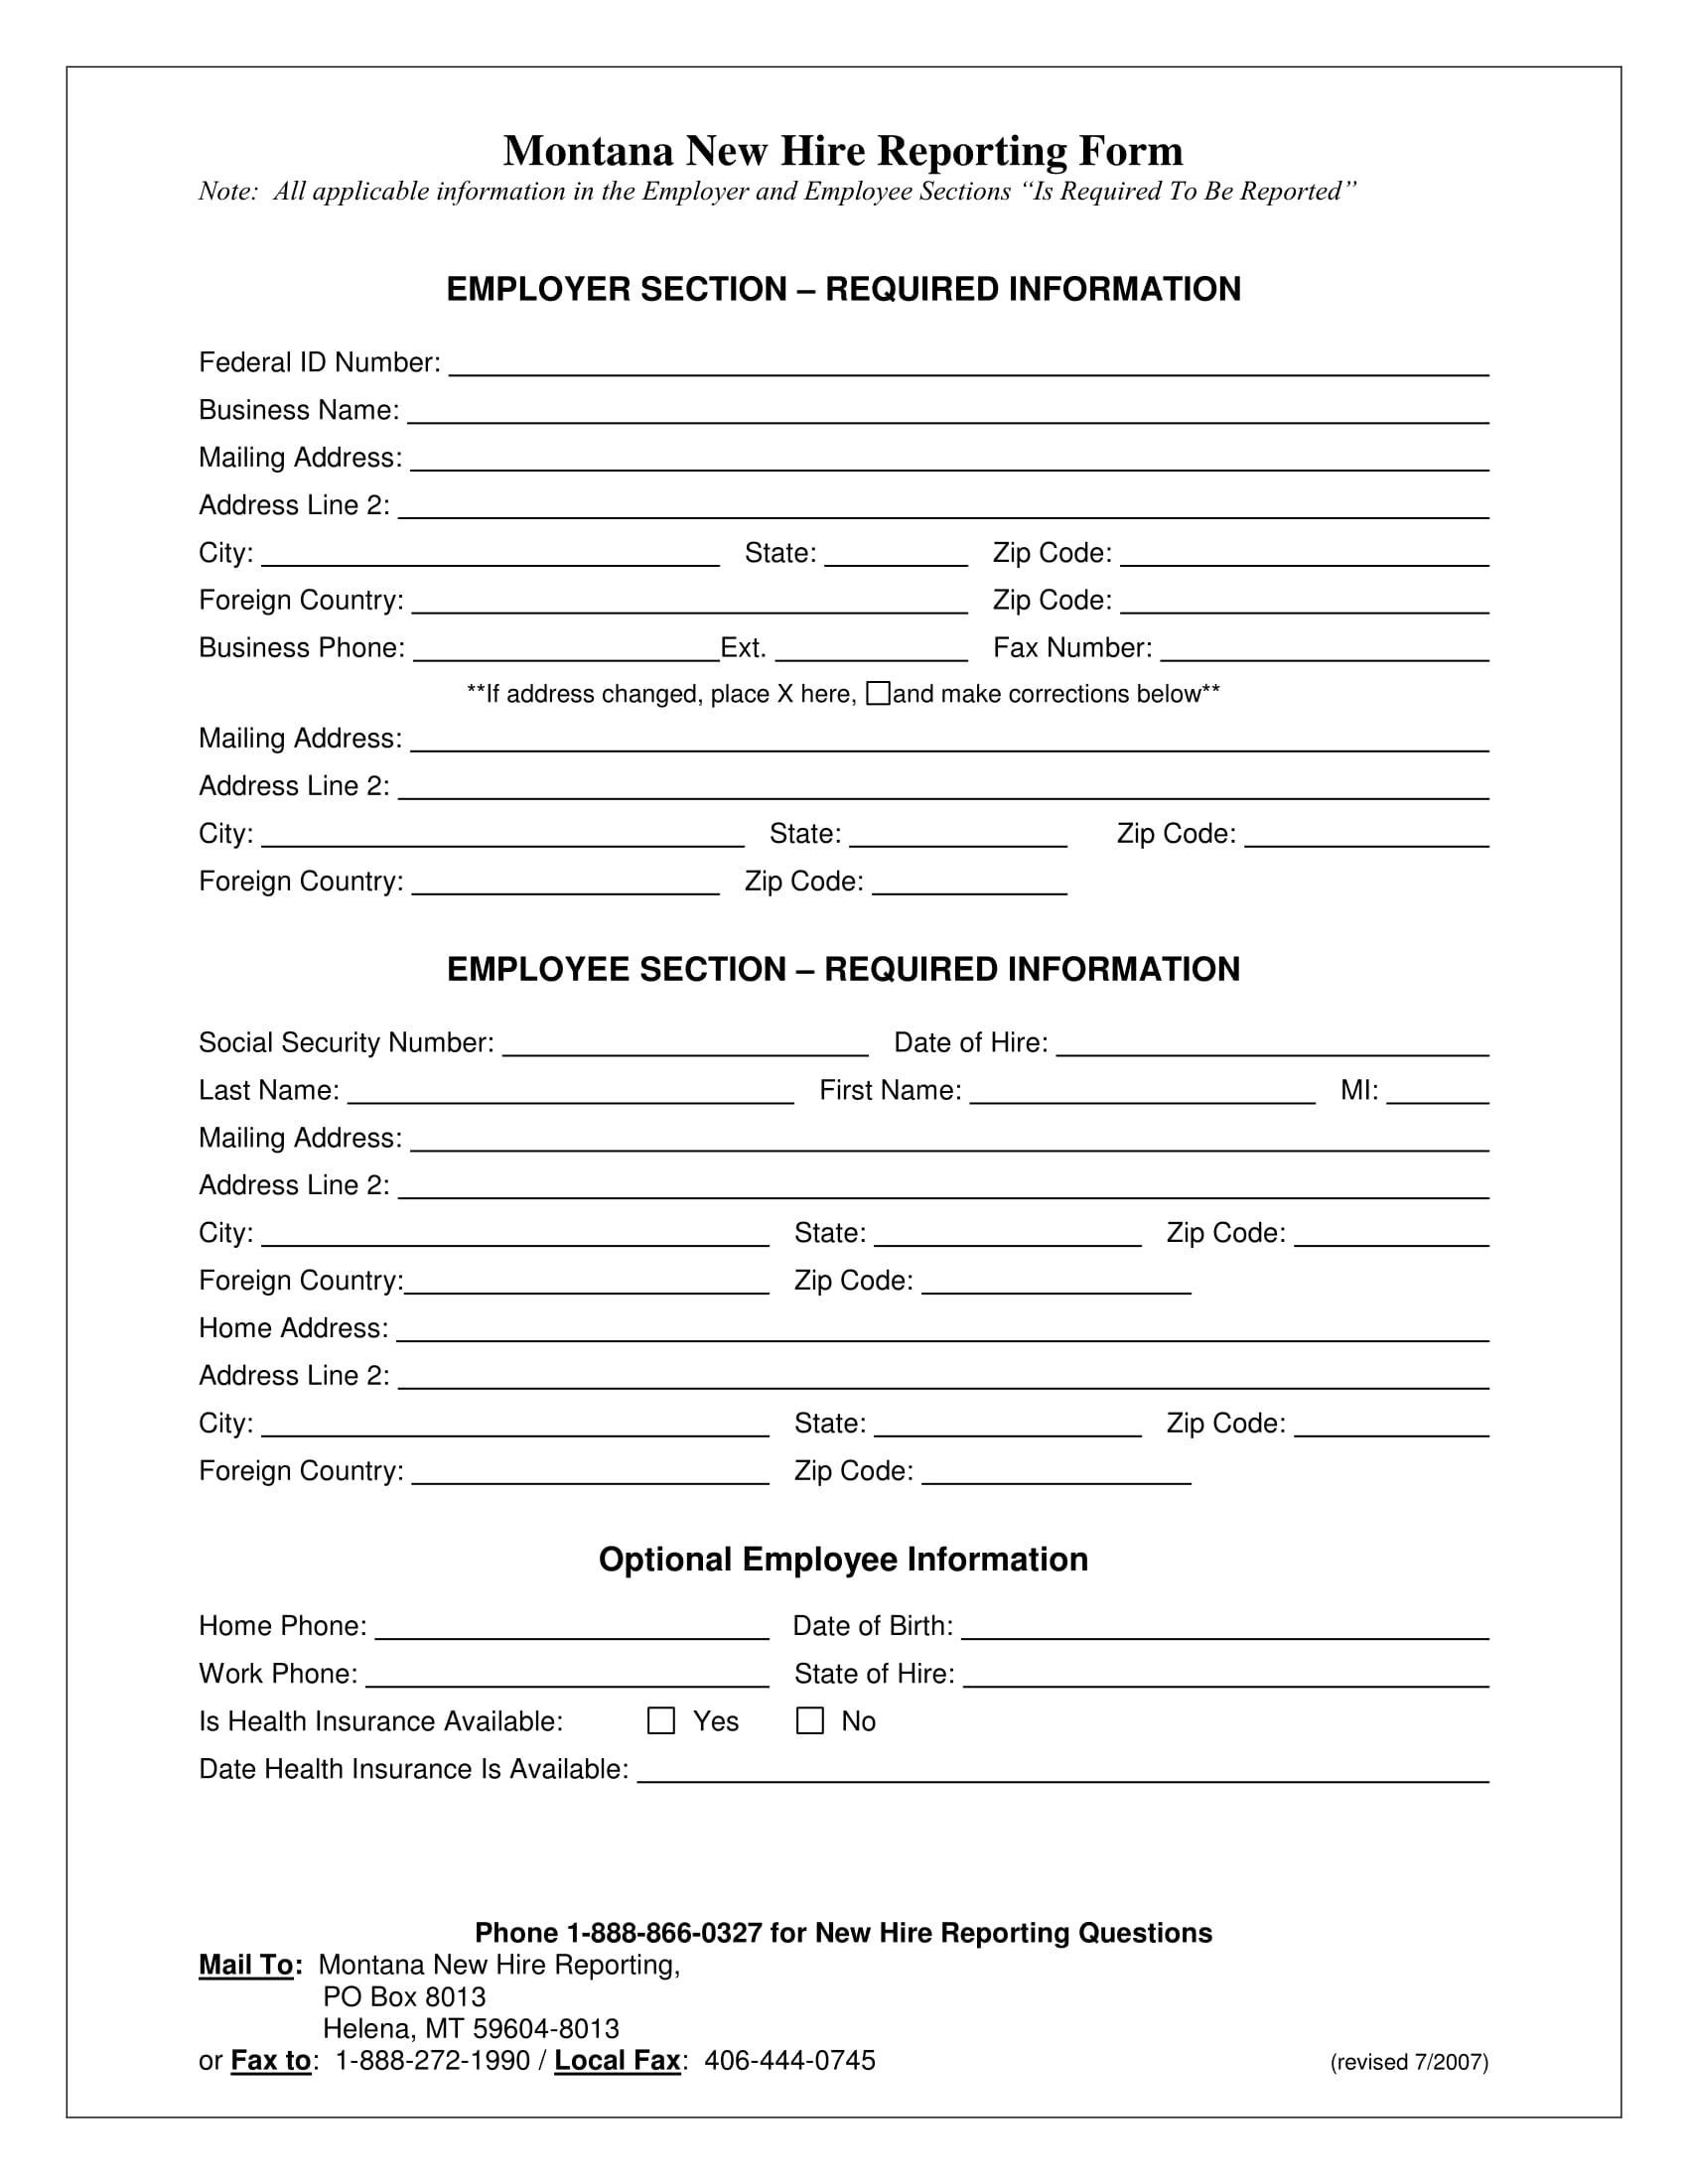 new hire reporting form 1